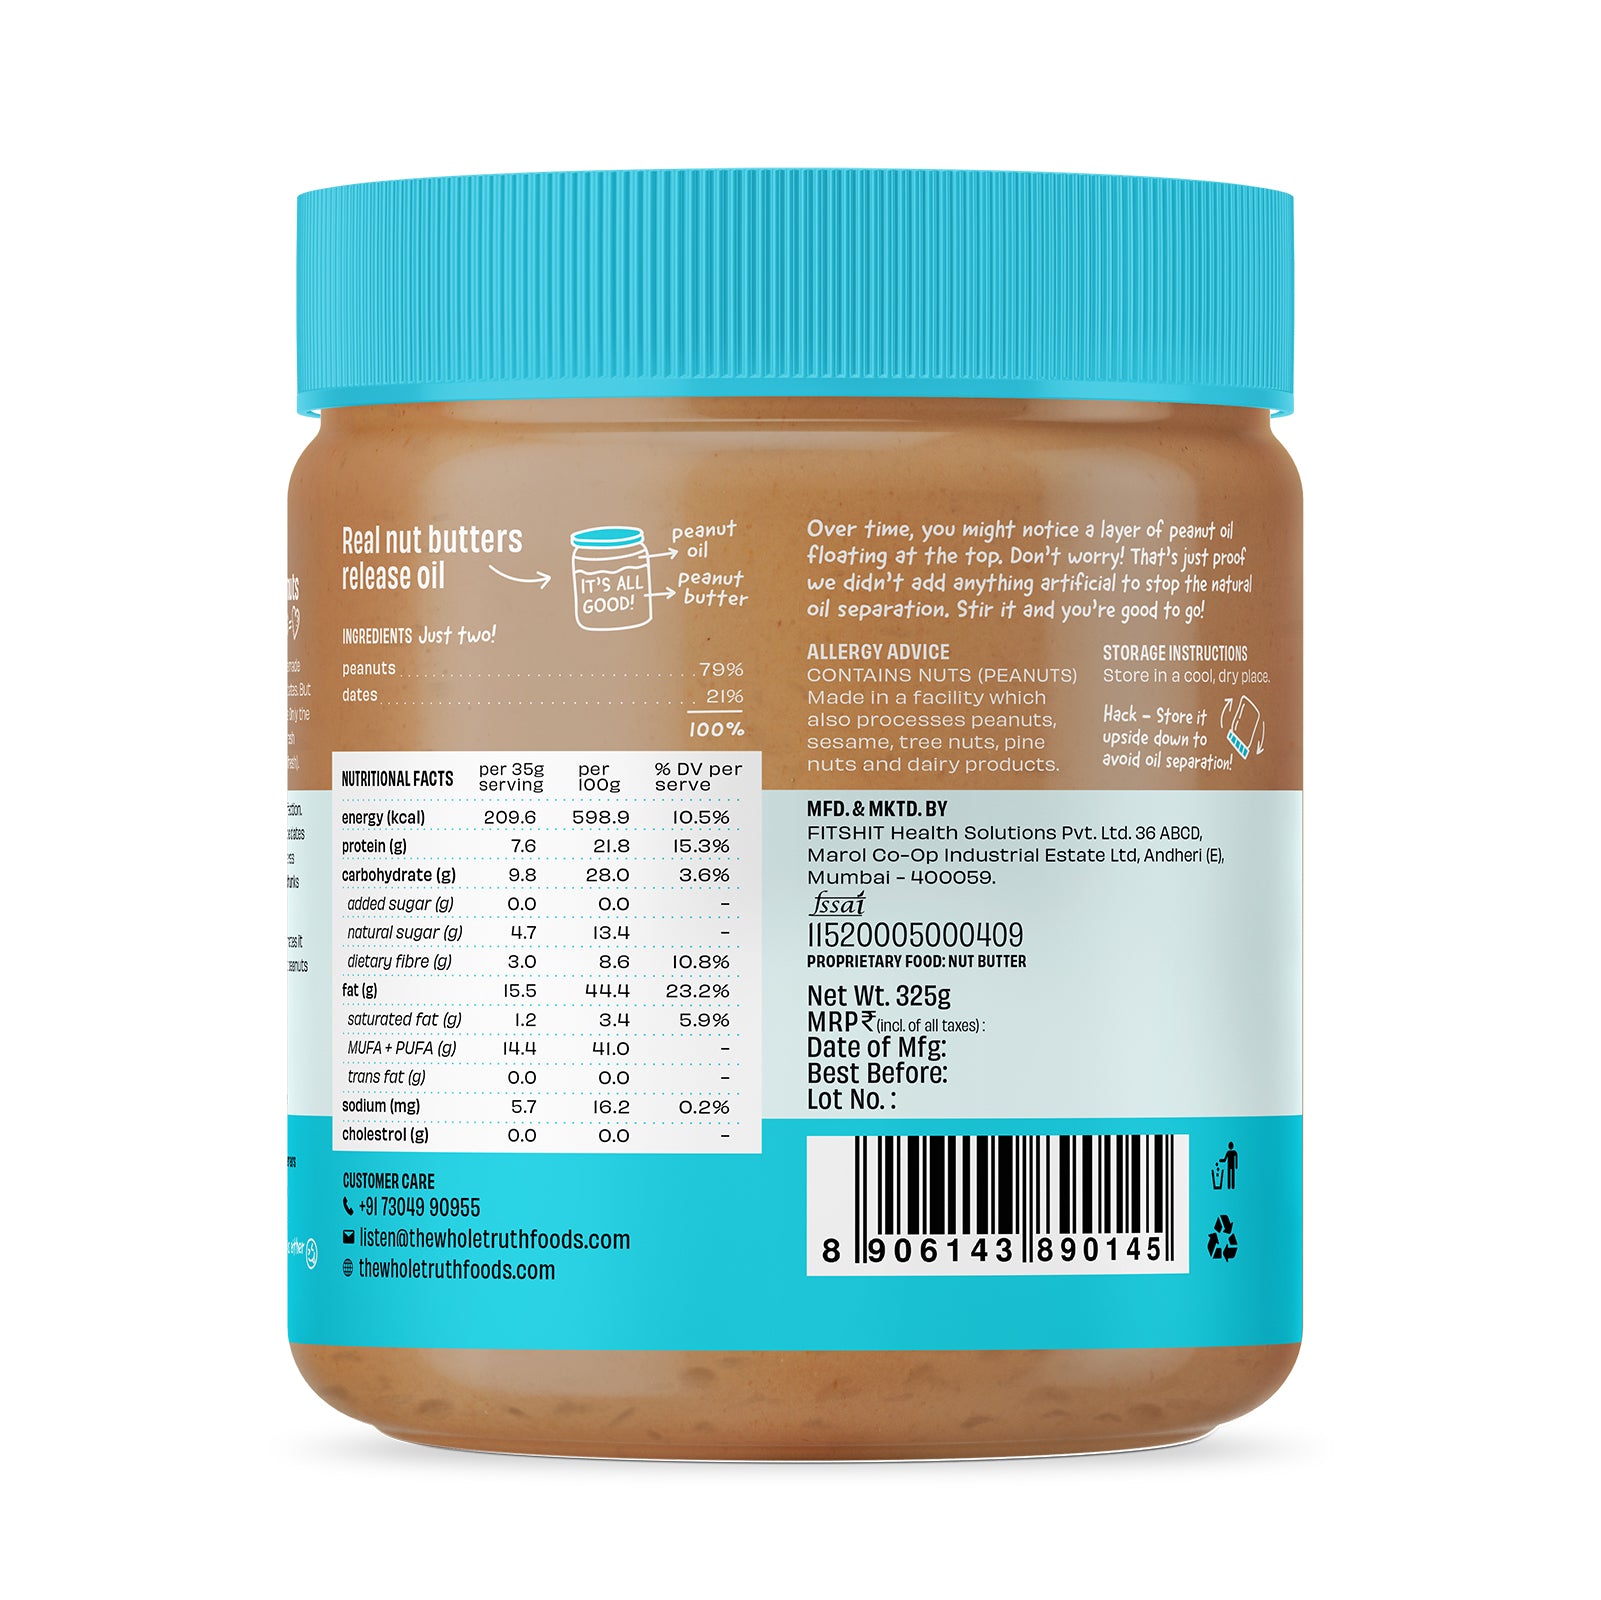 The Whole Truth - Peanut Butter with Dates - Crunchy | No Added Sugar | No Artificial Sweeteners | No Palm Oil | Vegan | Gluten Free | No Preservatives | 100% Natural